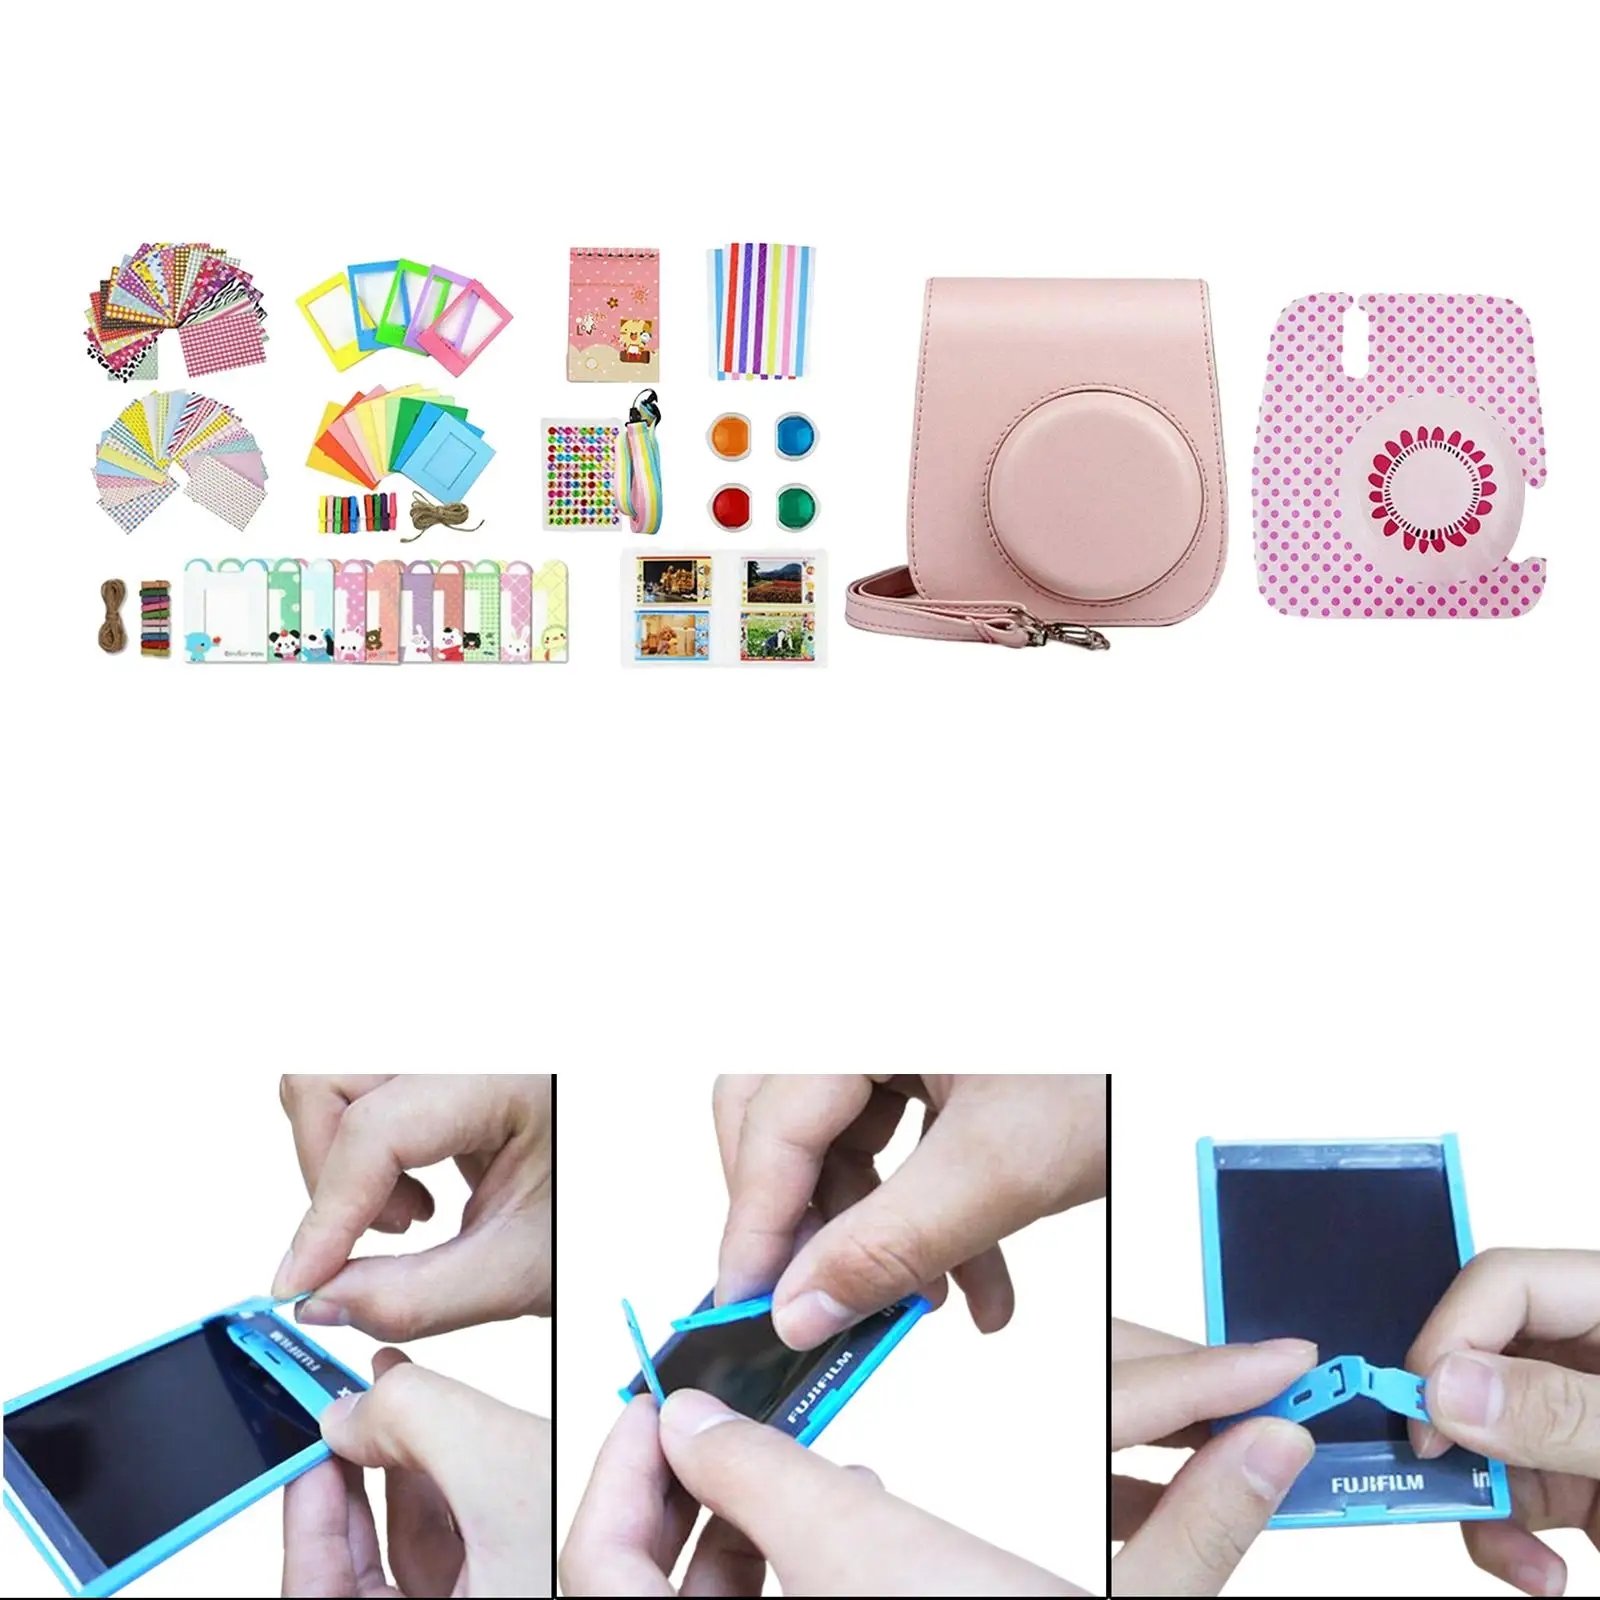 13 in 1 Camera Accessory Bundles for 11, with PU Leather Case, Filter, Photo Album, Sticker And